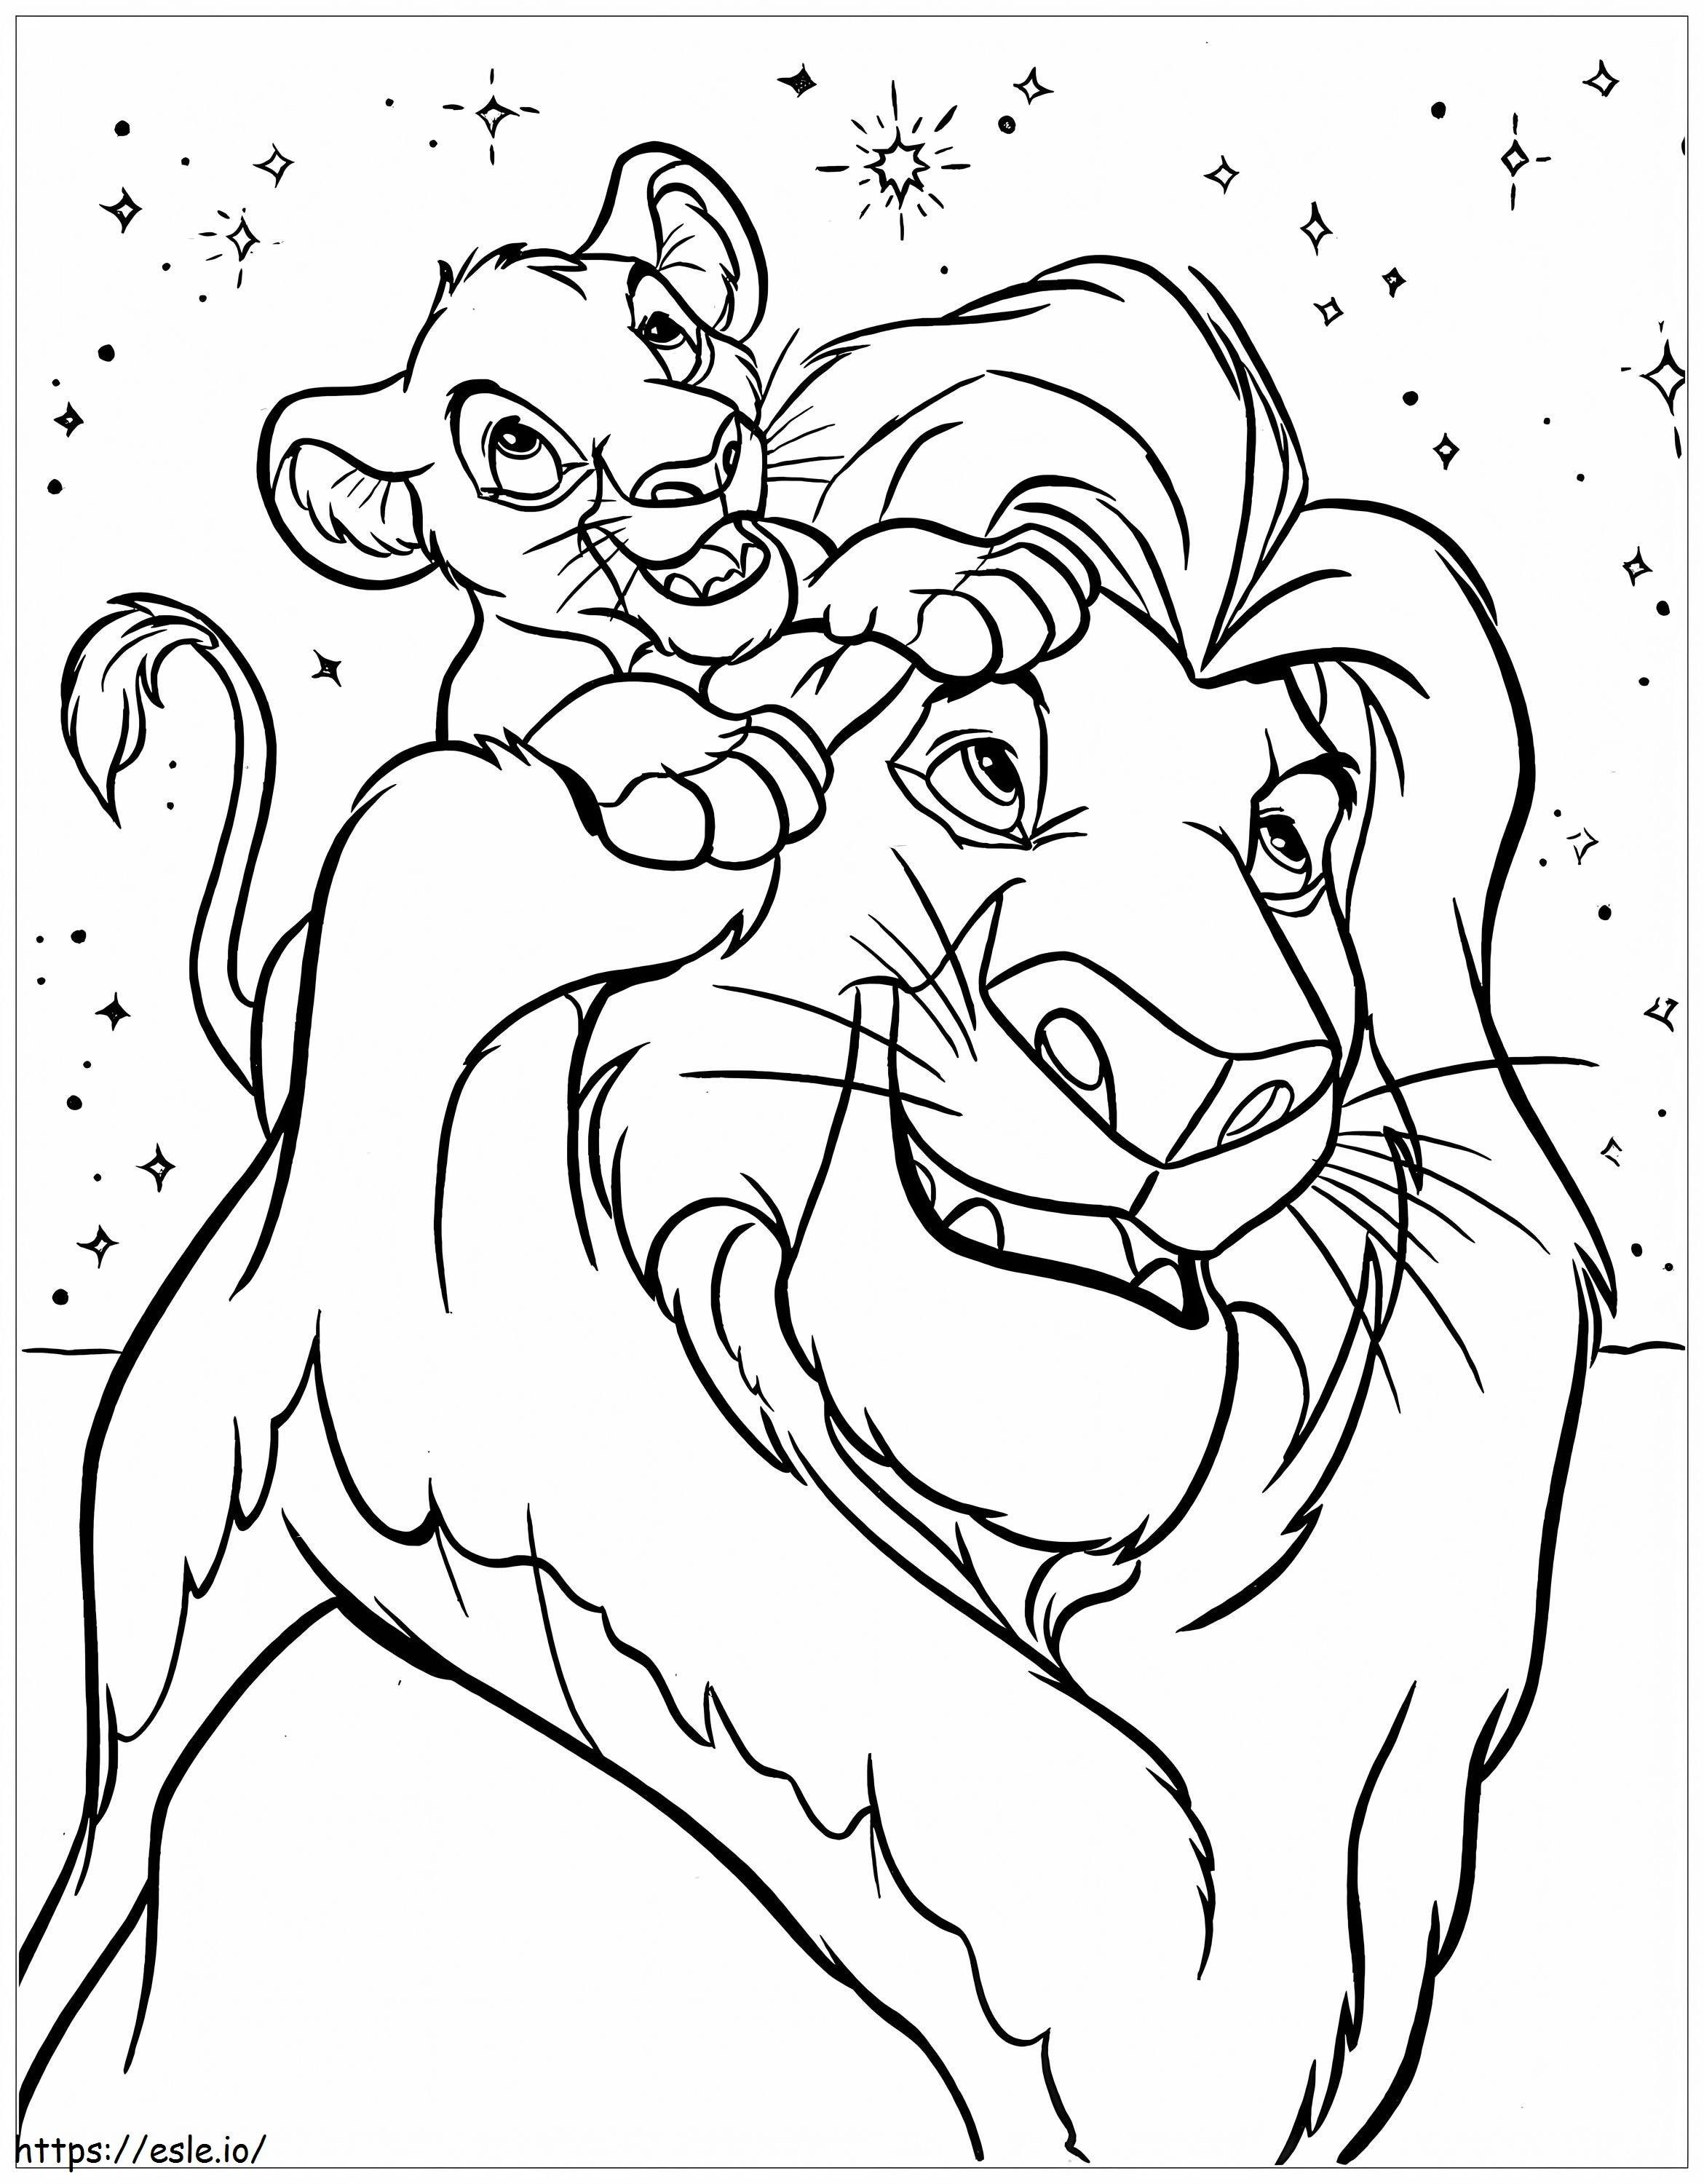 Mufasa With His Son Simba coloring page